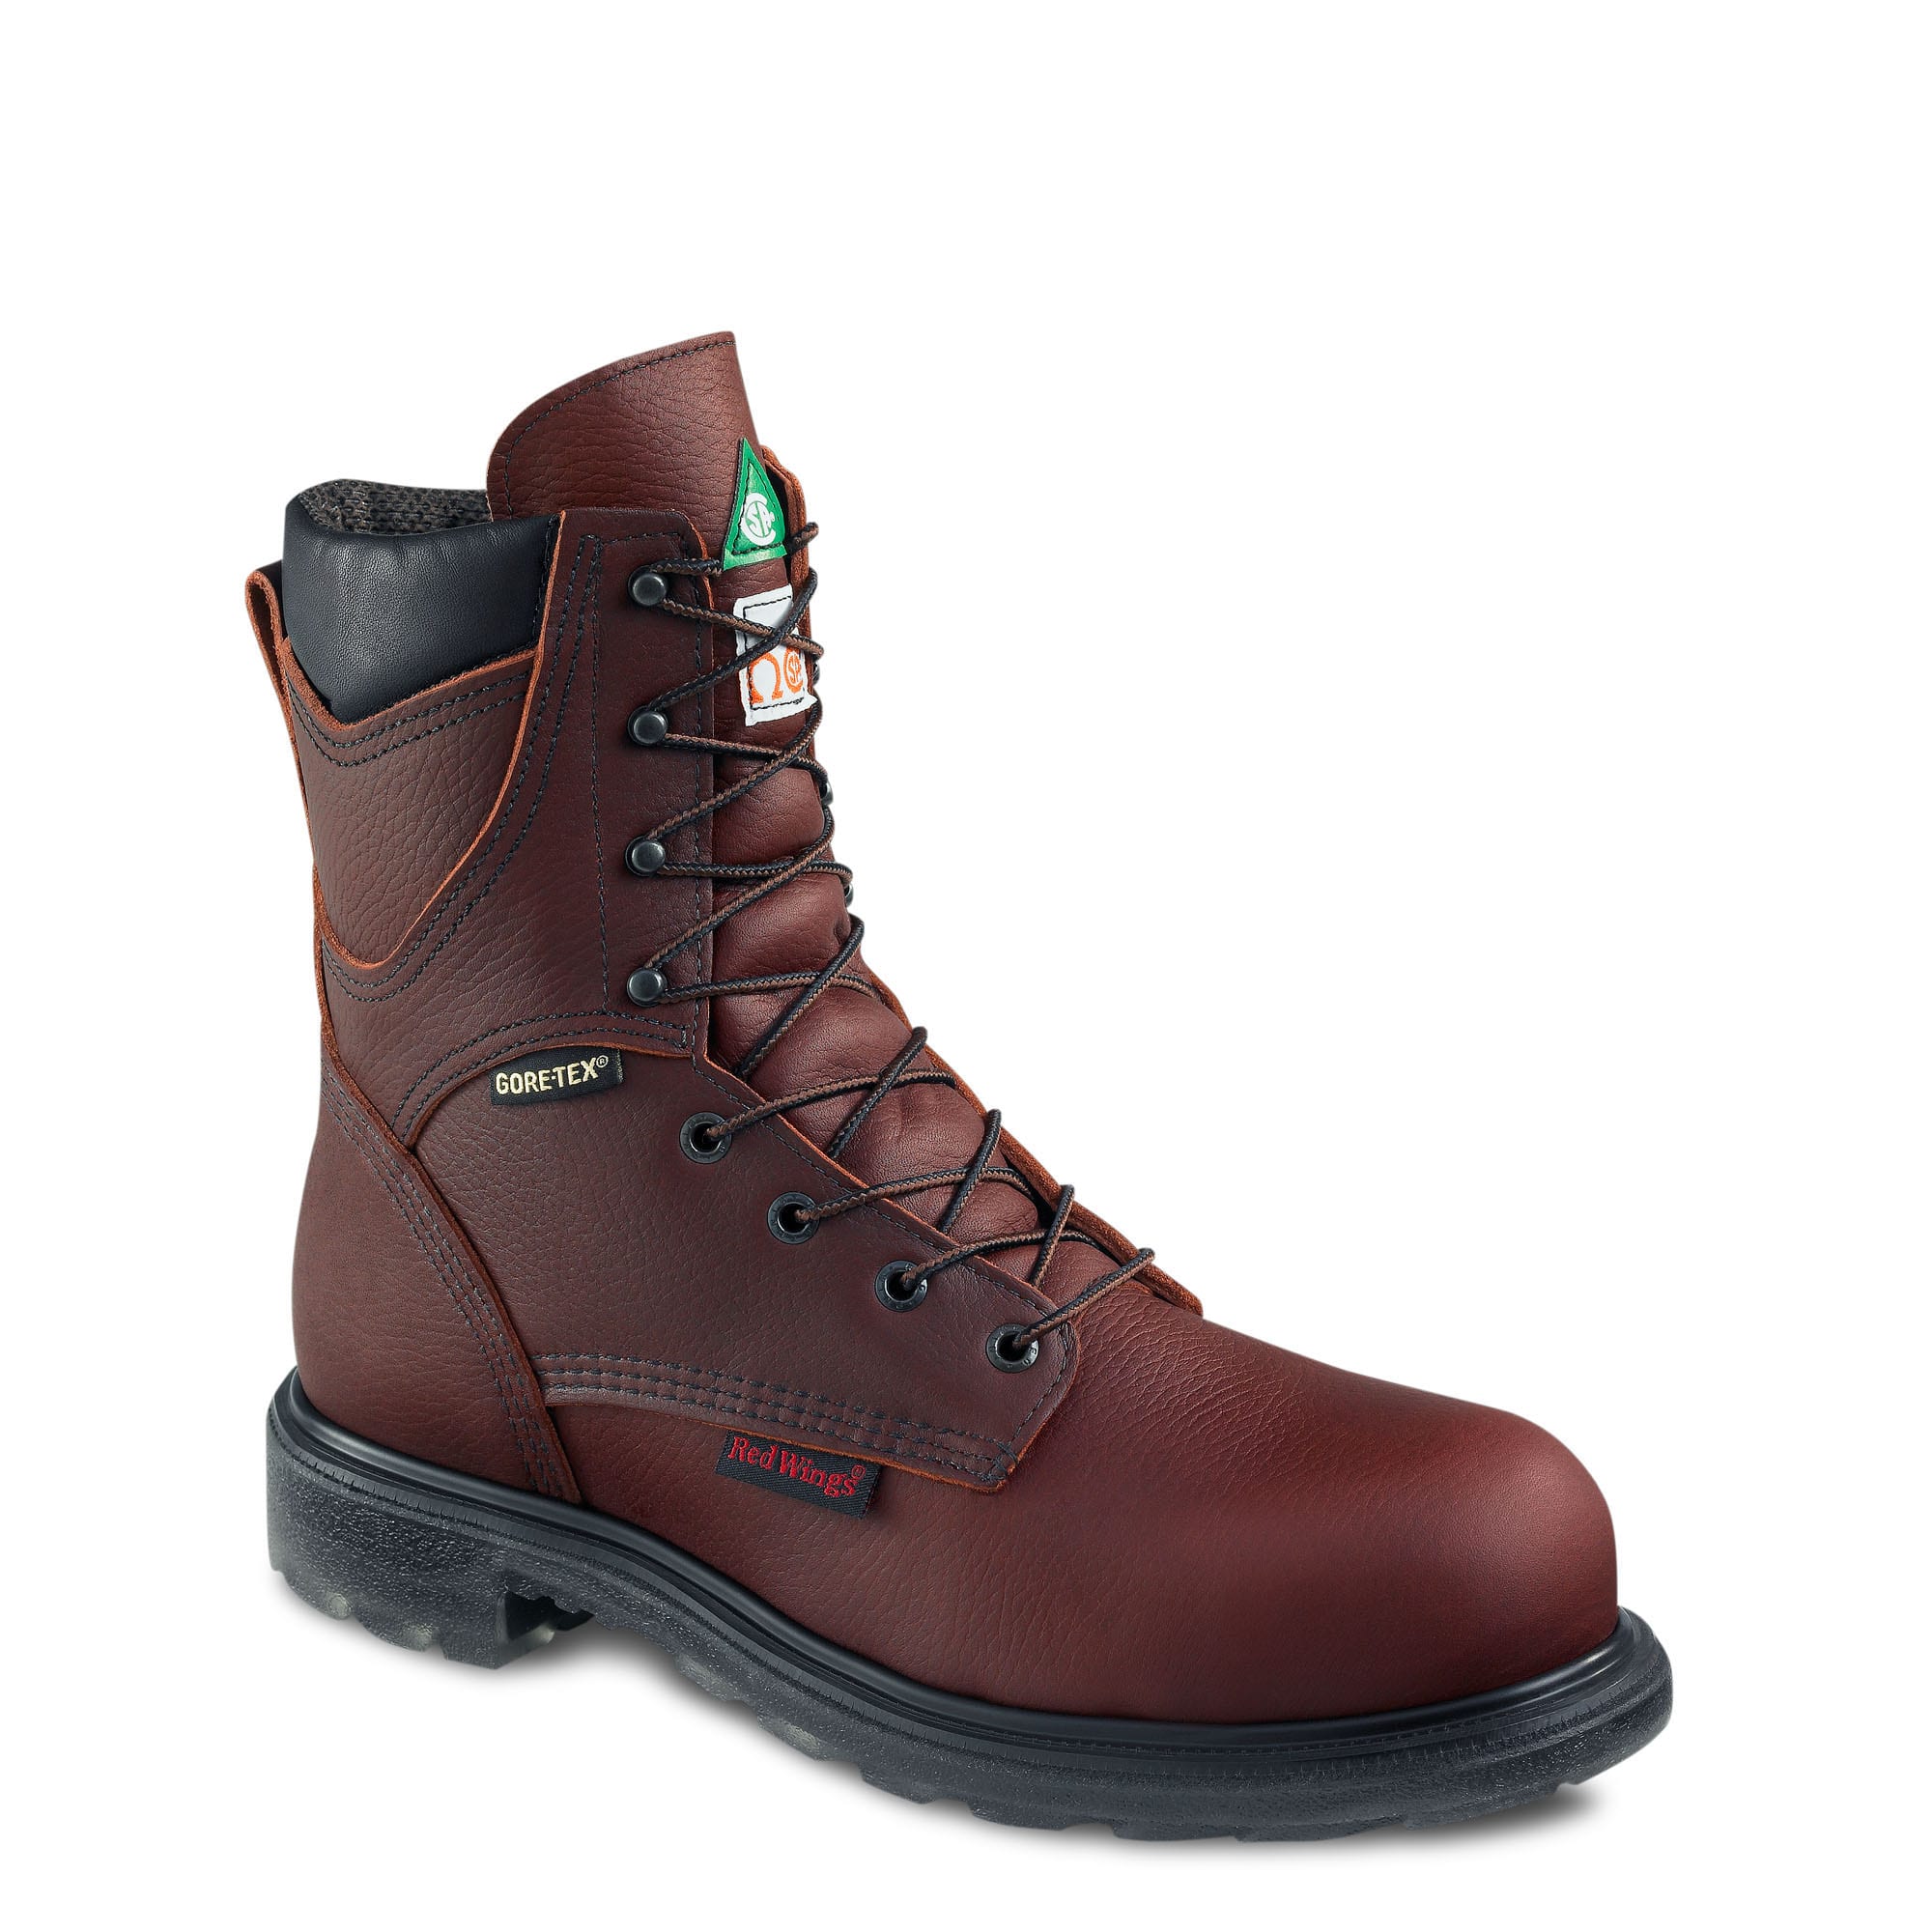 Total 90+ imagen red wing shoes 2414 - Abzlocal.mx